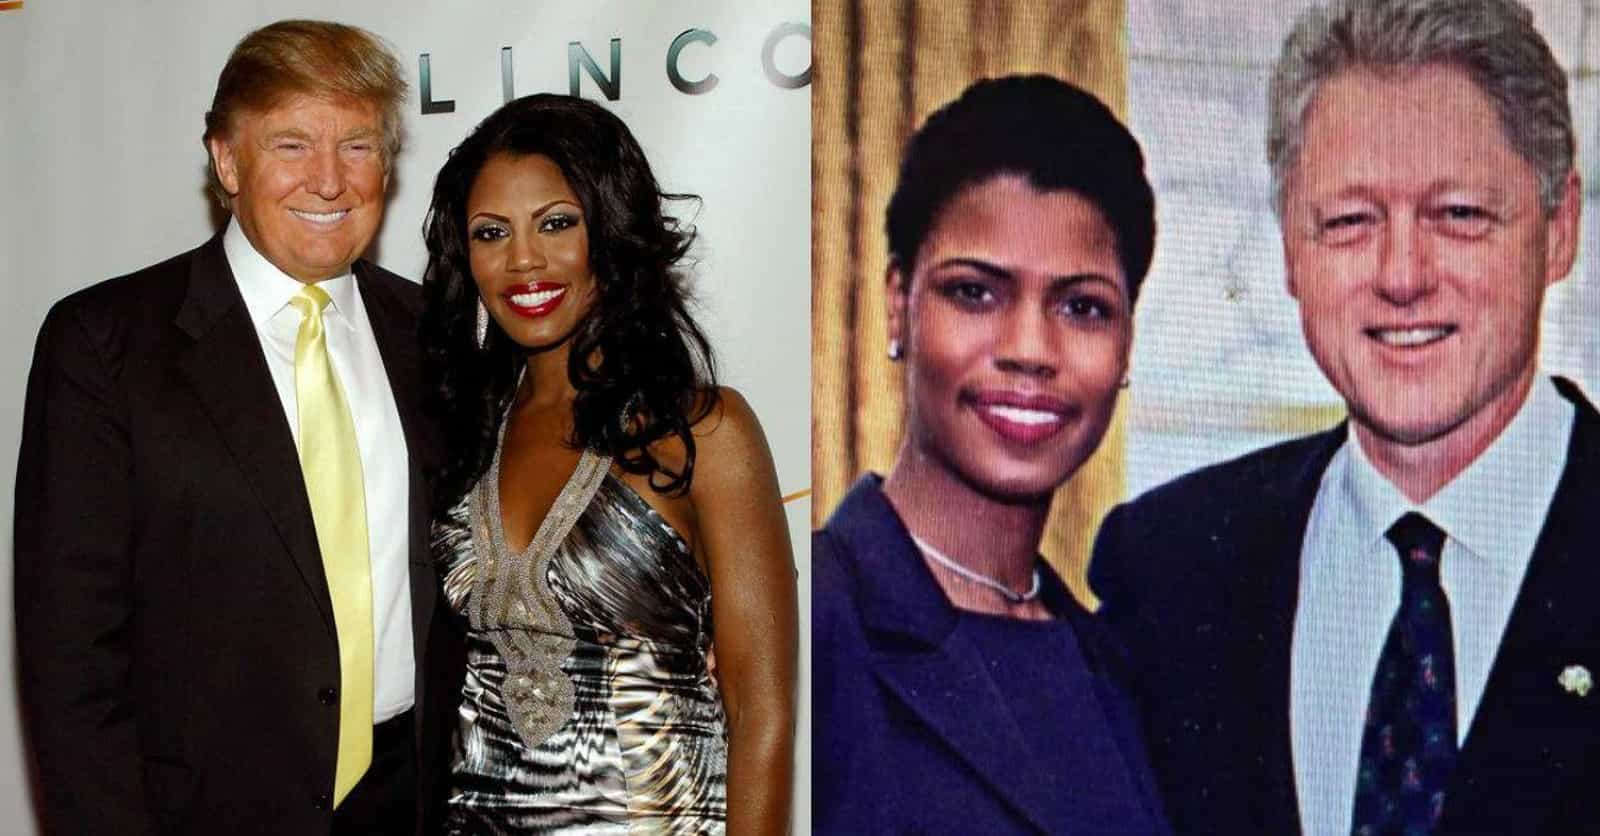 From The White House To Big Brother Celebrity Edition: Omarosa's Bizarre Fall From Trump's Graces